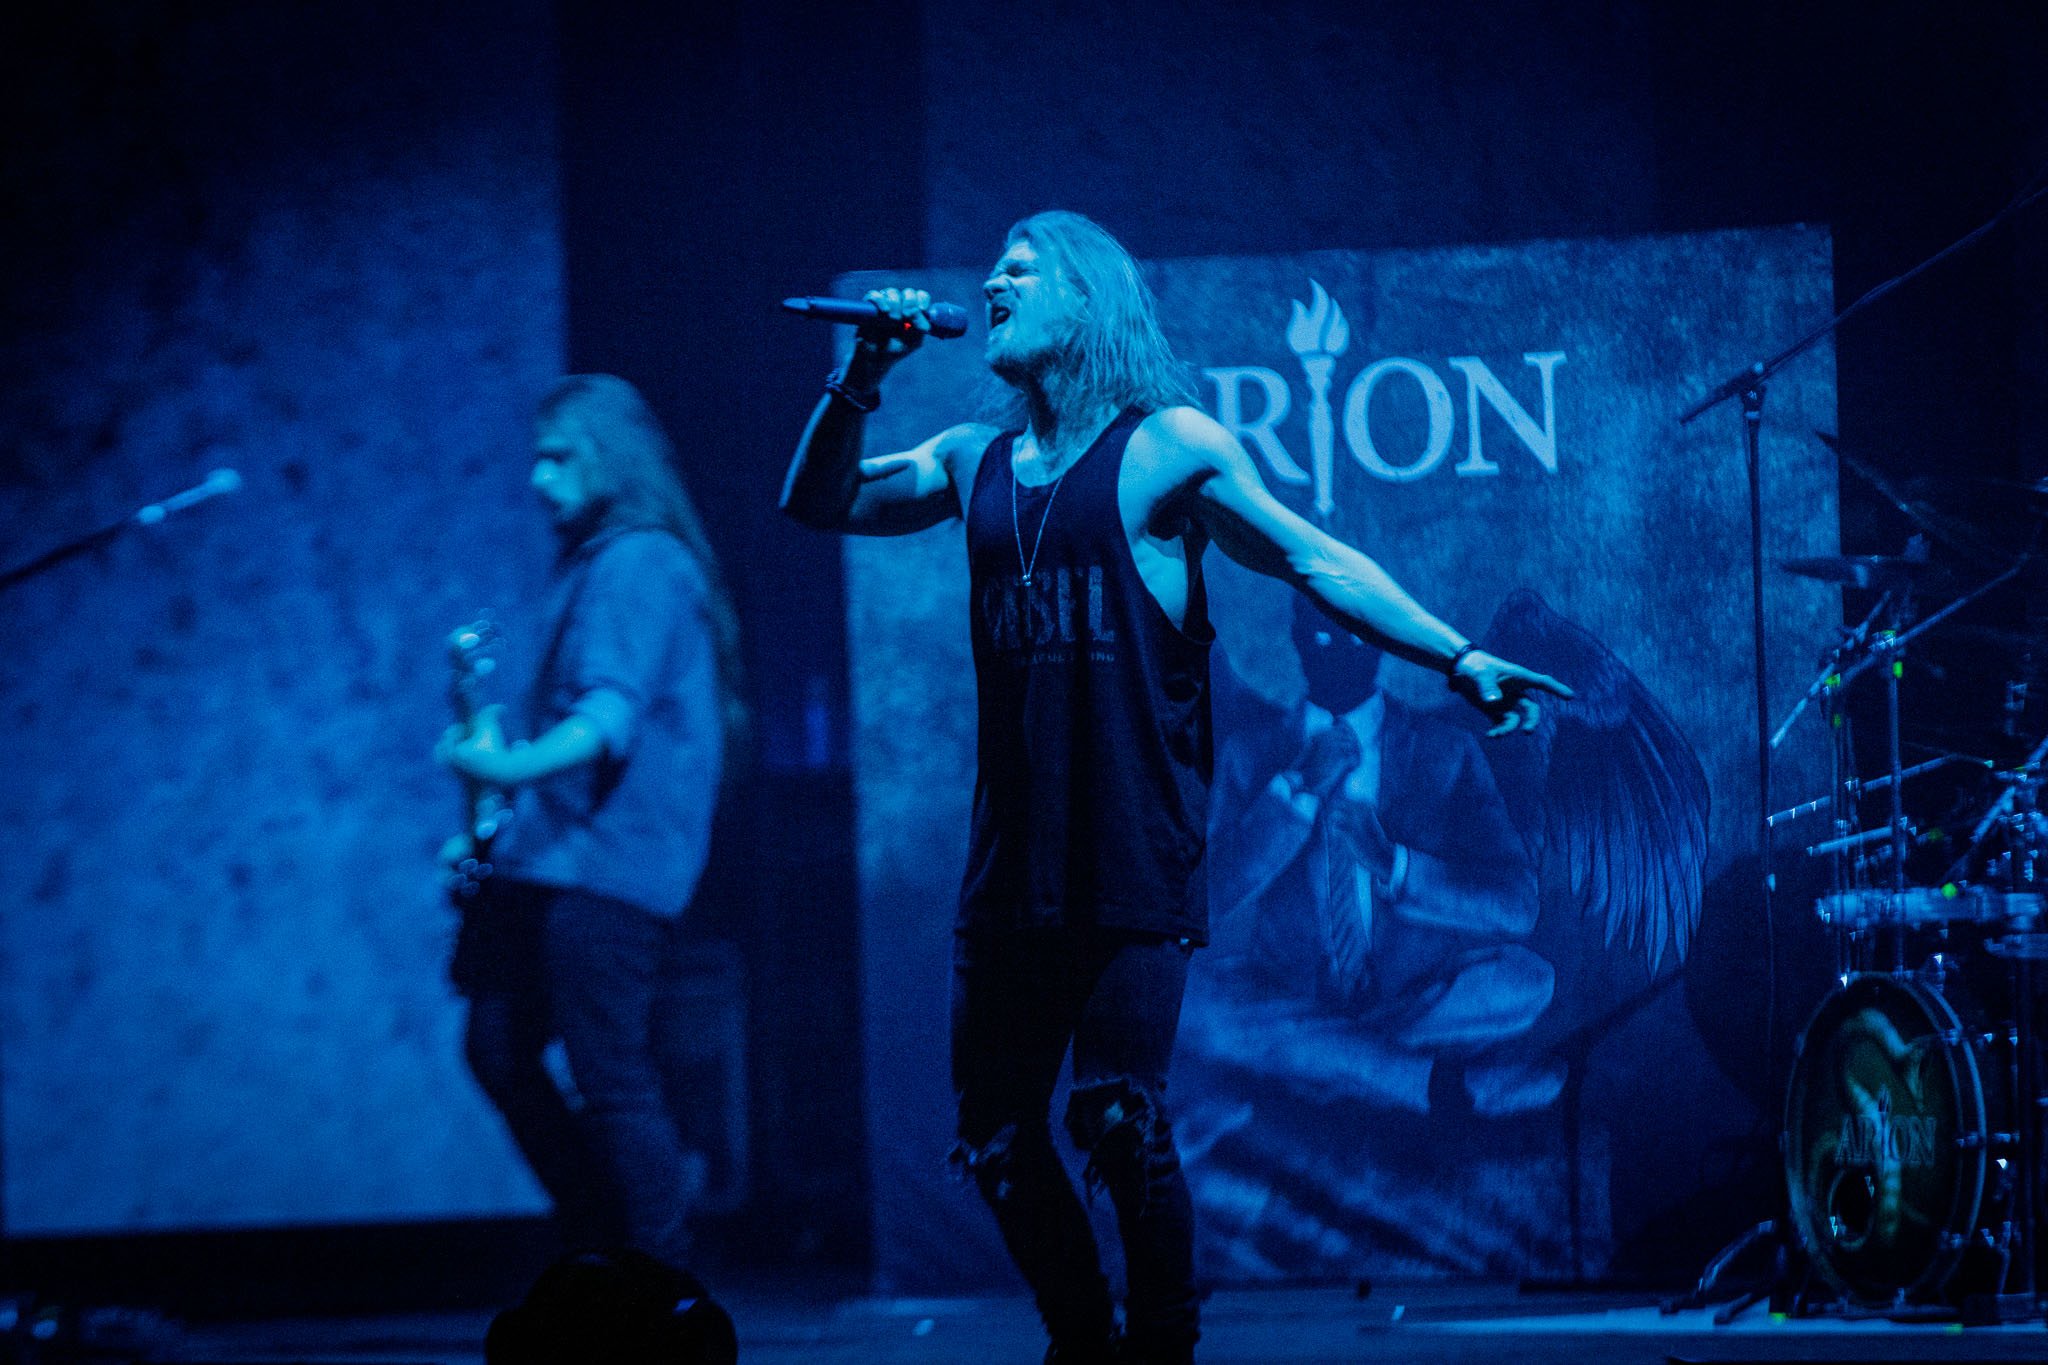 Arion at the O2 Apollo in Manchester on February 17th 2023 ©Joh